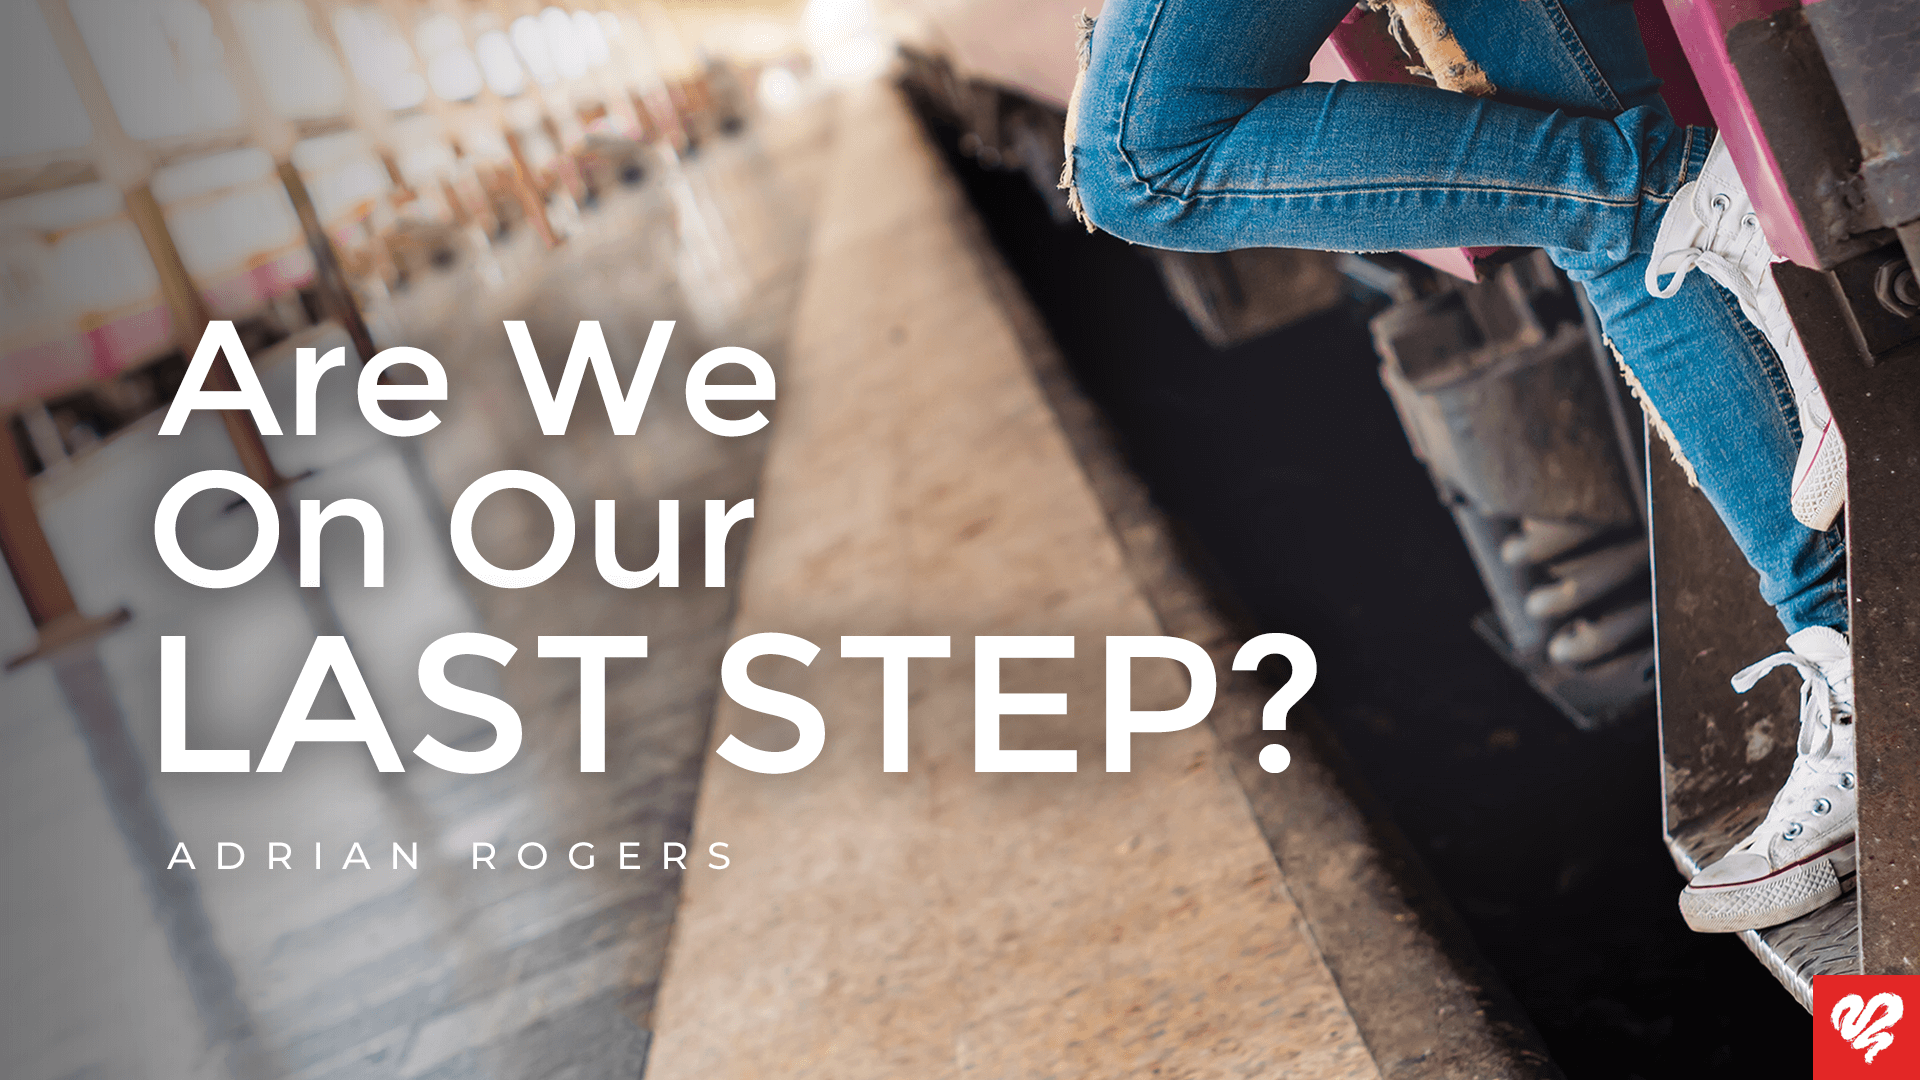 Are We On Our Last Step Article 1920x1080